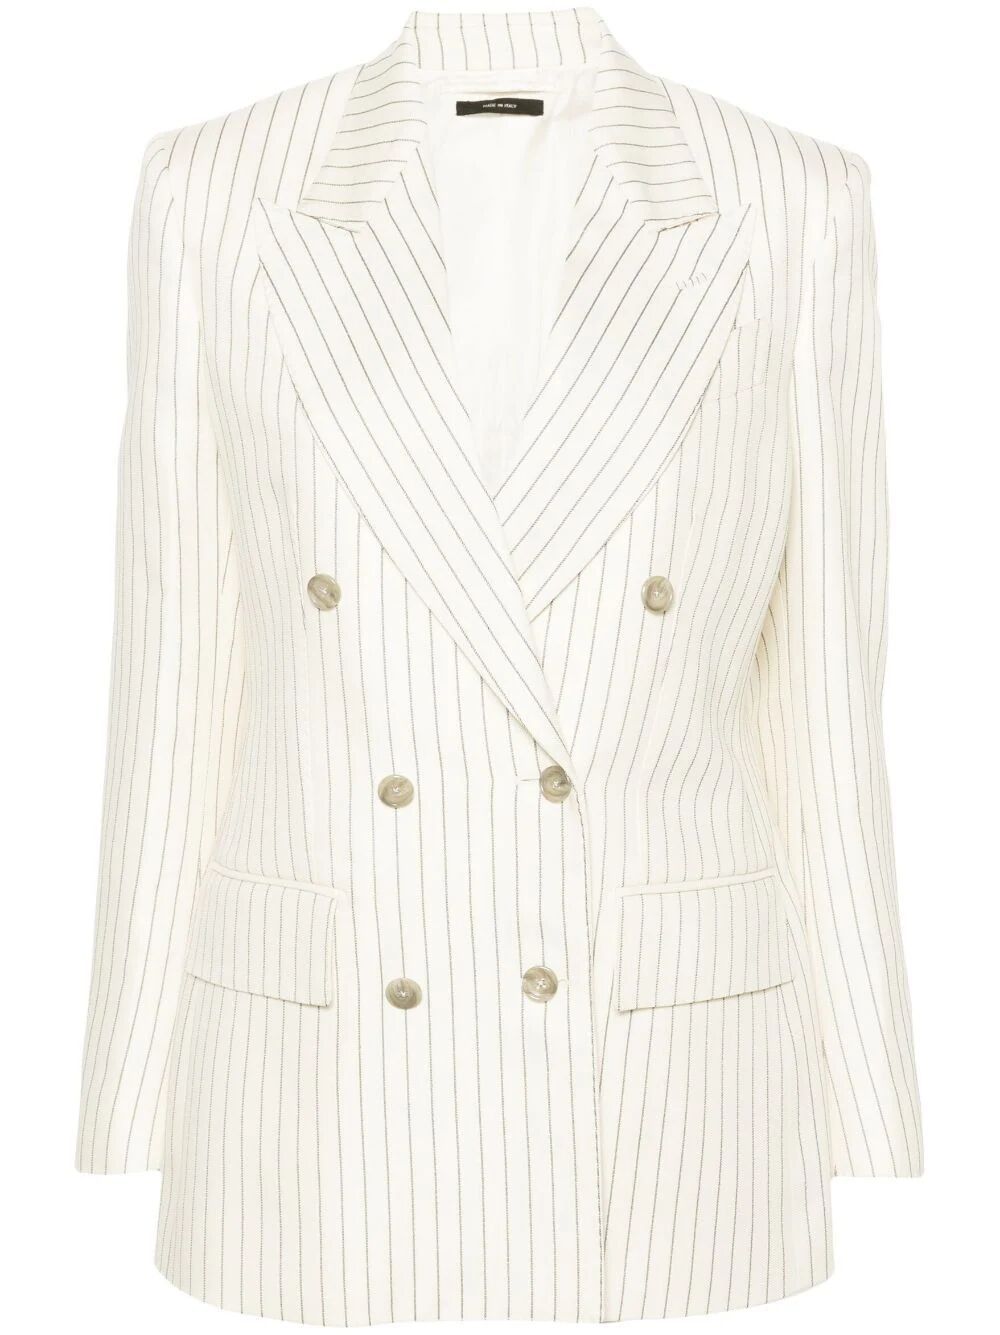 TOM FORD Striped Double Breasted Twill Blazer for Women